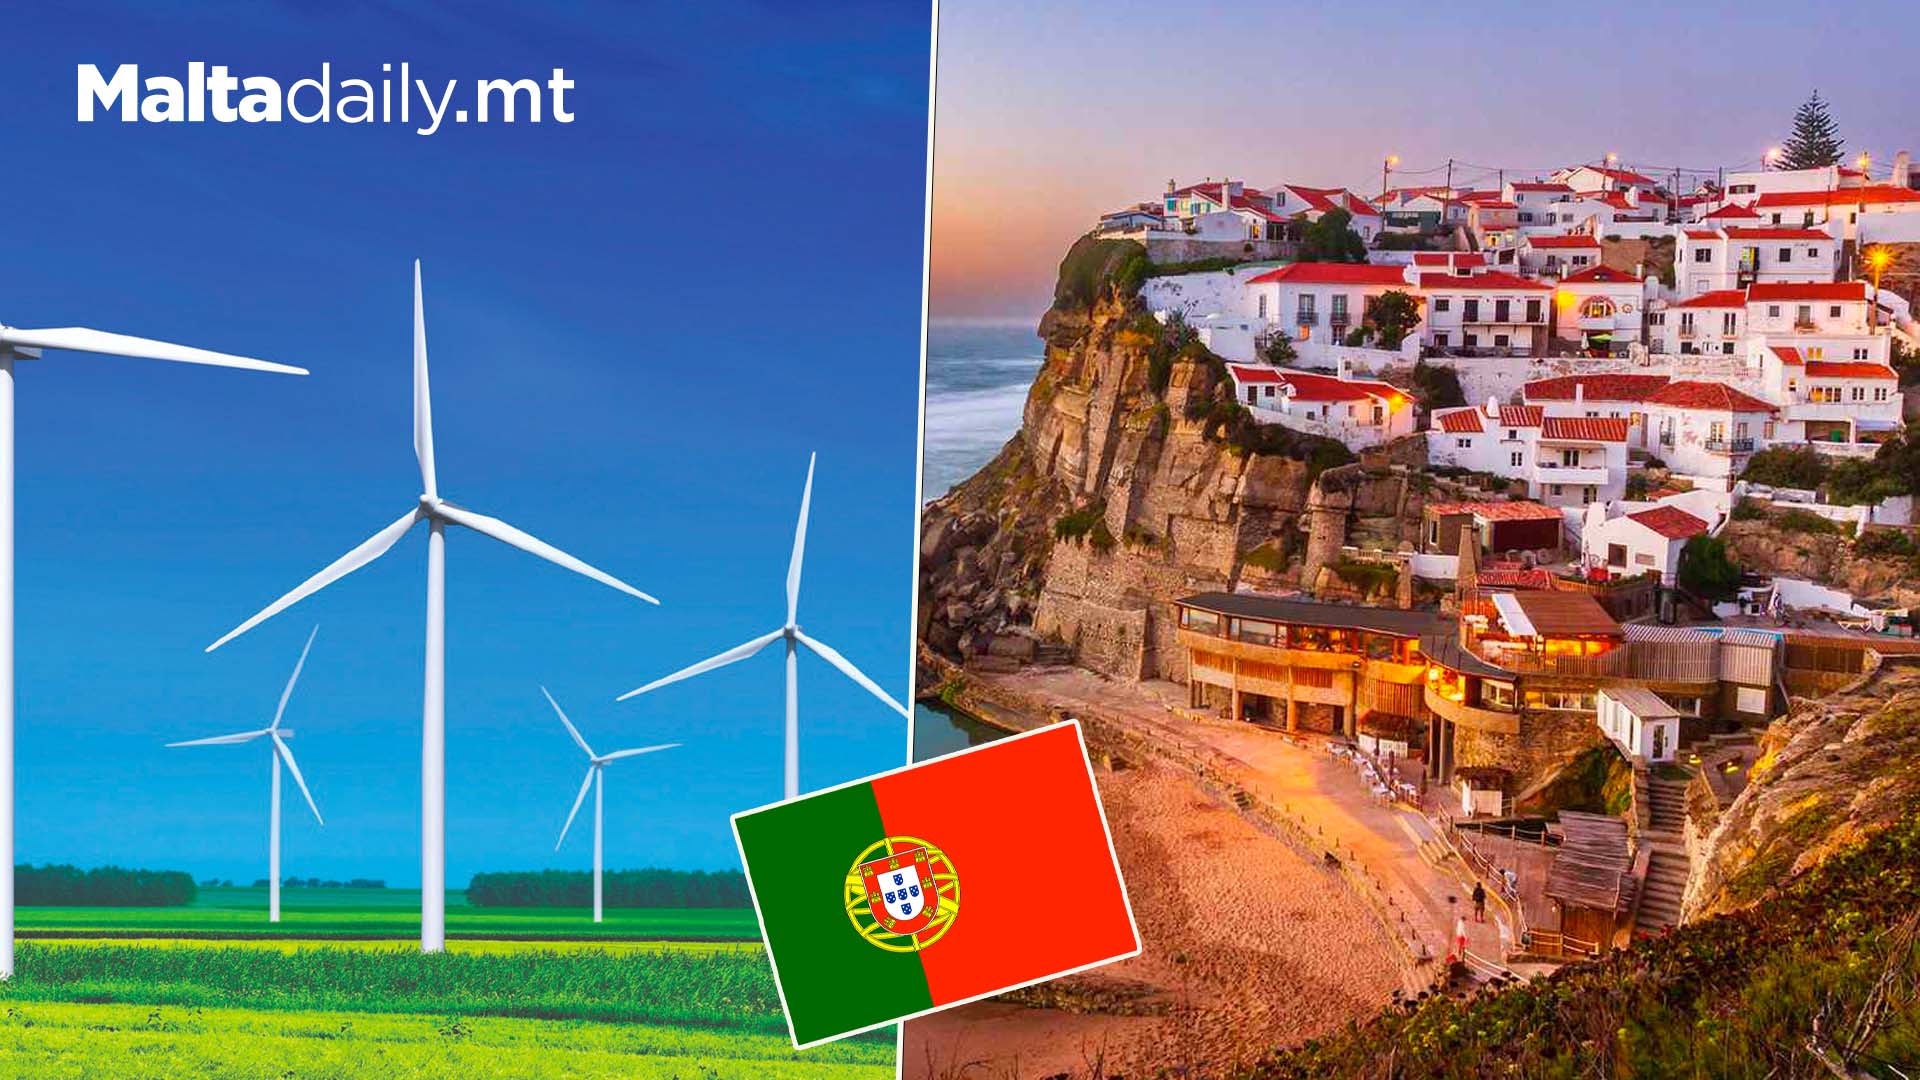 Portugal Ran On 100% Renewable Energy For 6 Days Straight